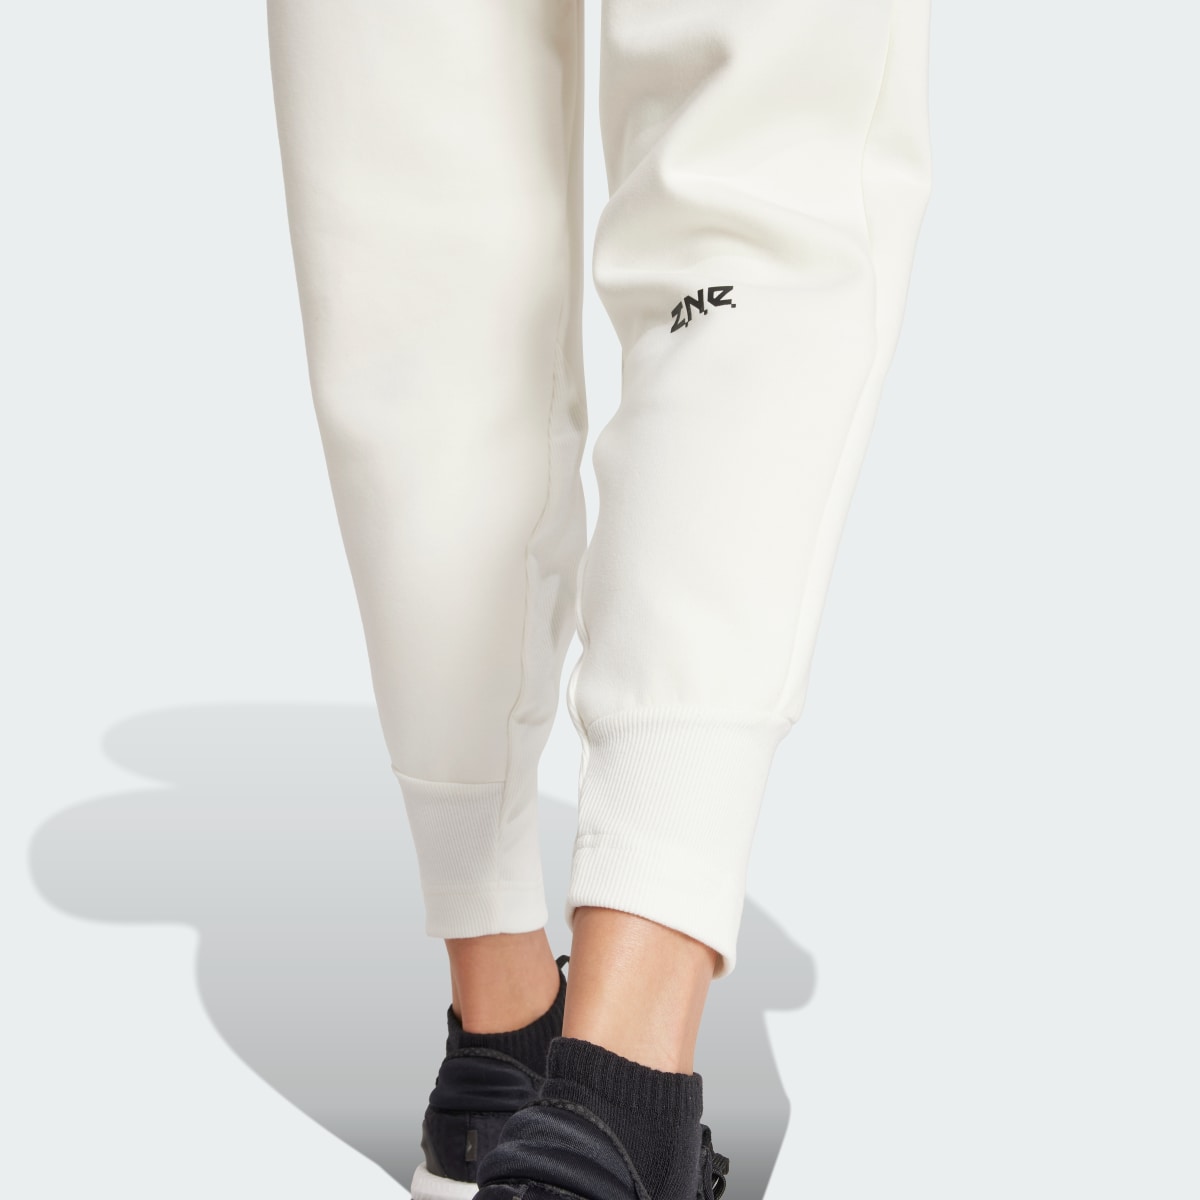 Adidas Z.N.E. Tracksuit Bottoms. 6